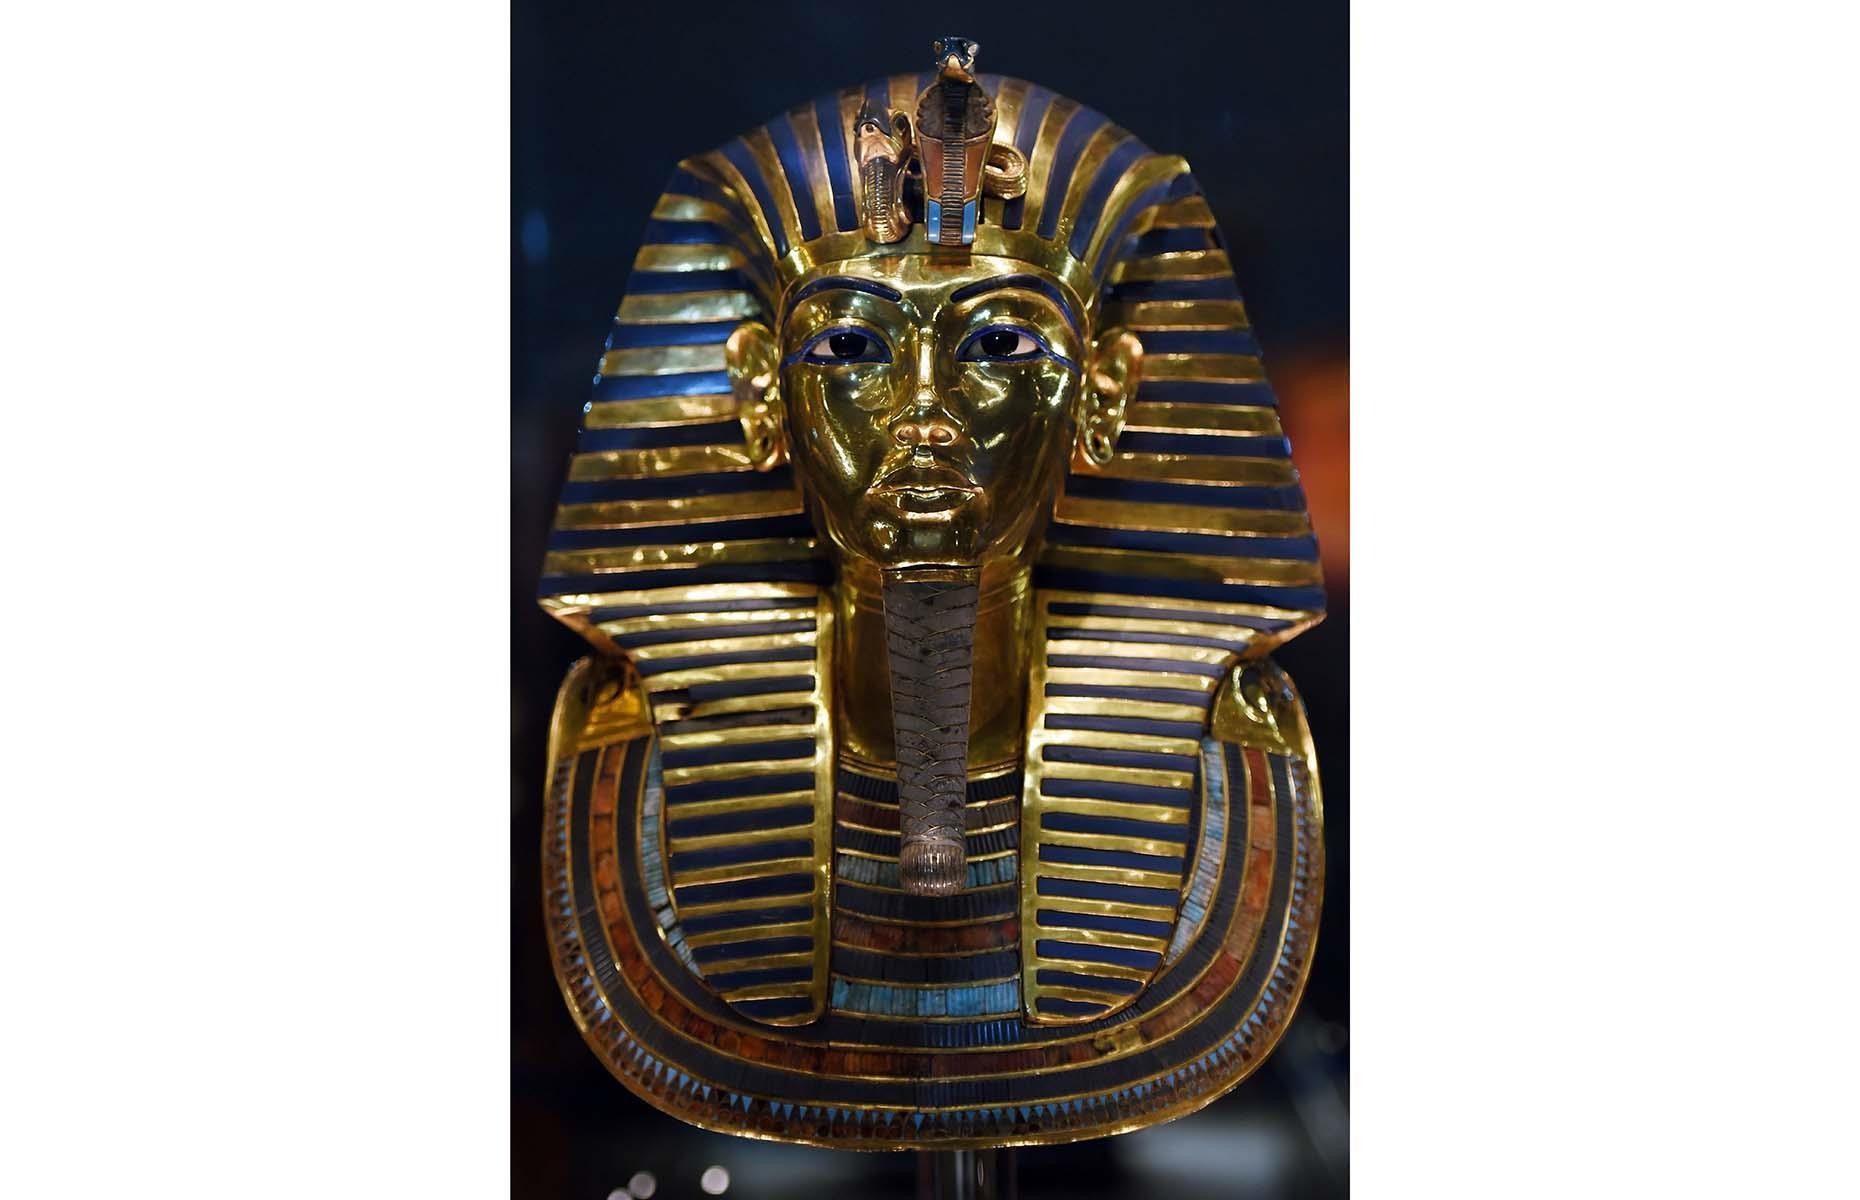 <p>Tutankhamun's tomb is one of the most famous in the Valley of the Kings, even though it wasn't discovered until 1922. His legendary funerary mask was made from 22lbs (10kg) of solid gold, as well as lapis lazuli, quartz, glass and obsidian. His body was wrapped in resin-soaked bandages and was accompanied by items that would help him into the afterlife. Some have speculated that the tomb he was found in seems second-hand – could it have been intended for his <a href="https://www.theguardian.com/culture/2022/sep/26/tutankhamun-burial-chamber-could-contain-door-to-nefertiti-tomb">stepmother, Queen Nefertiti</a>?</p>